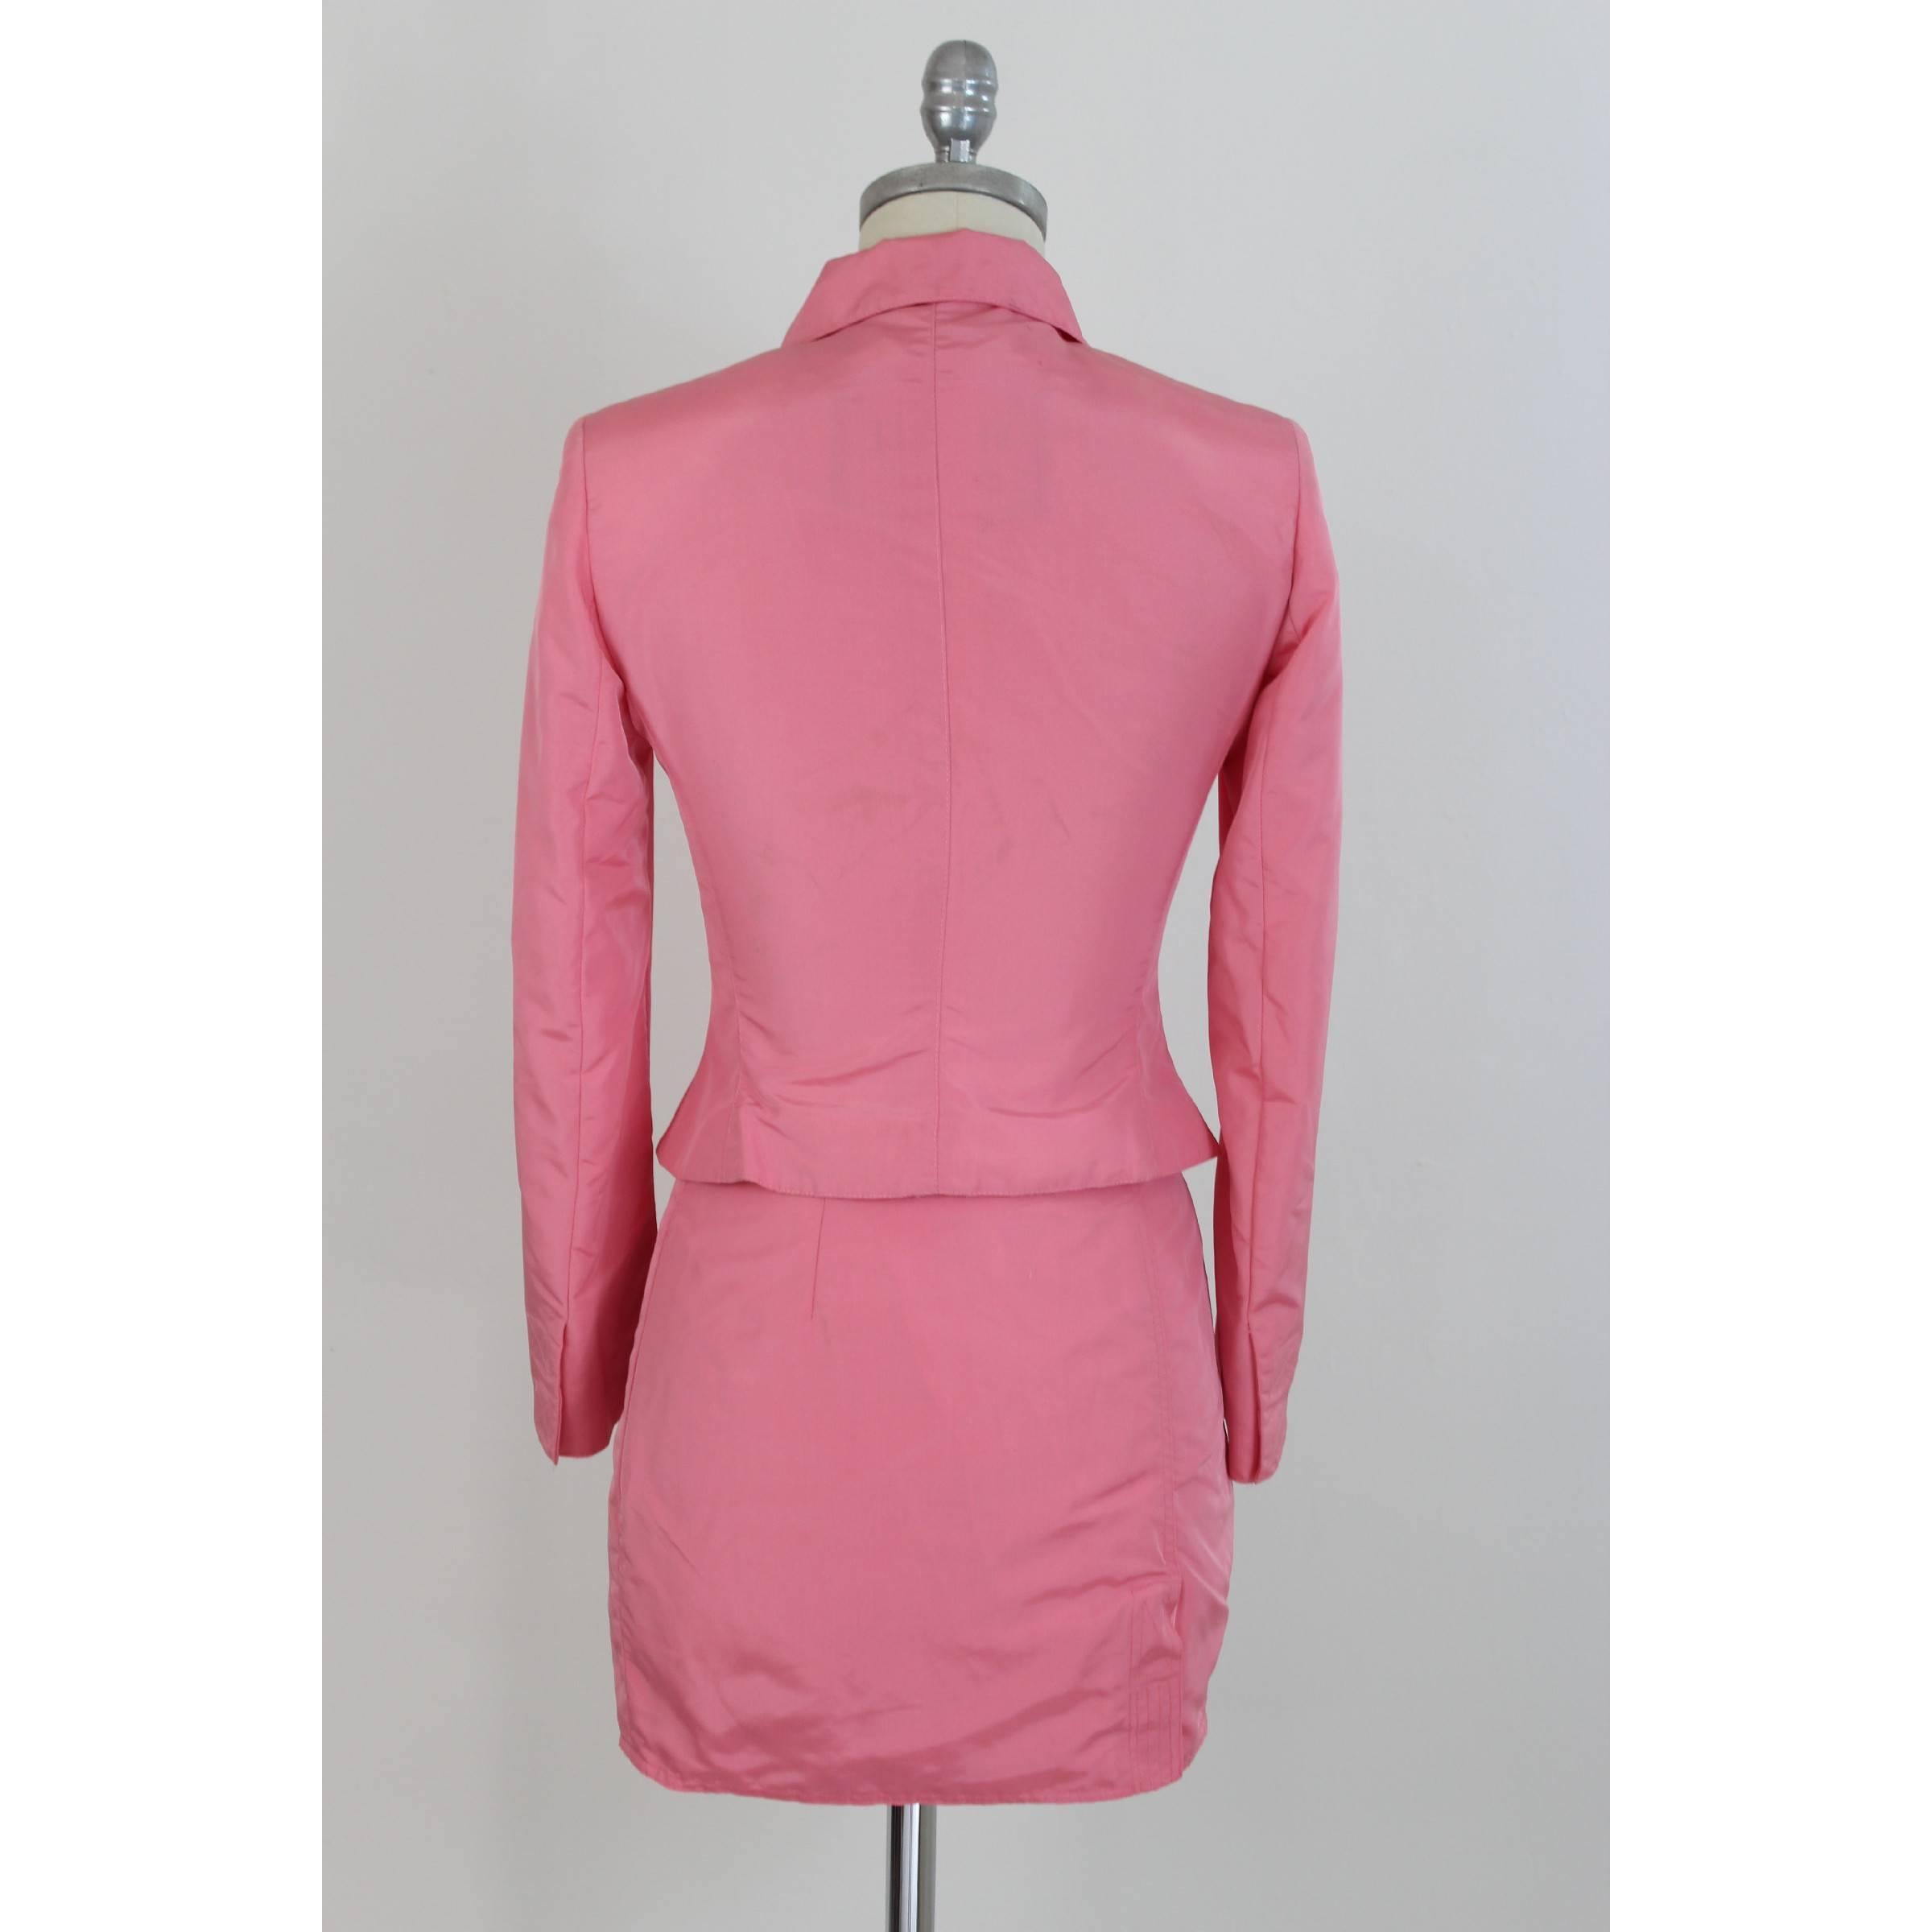 Versace Jeans Couture set, pink, 99% polyamide 1% polyurethane. The outfit consists of a jacket and a skirt, a short jacket with a slim fit waistband, internal buttons closure and velcro straps, the mini model skirt has a velcro closure along the